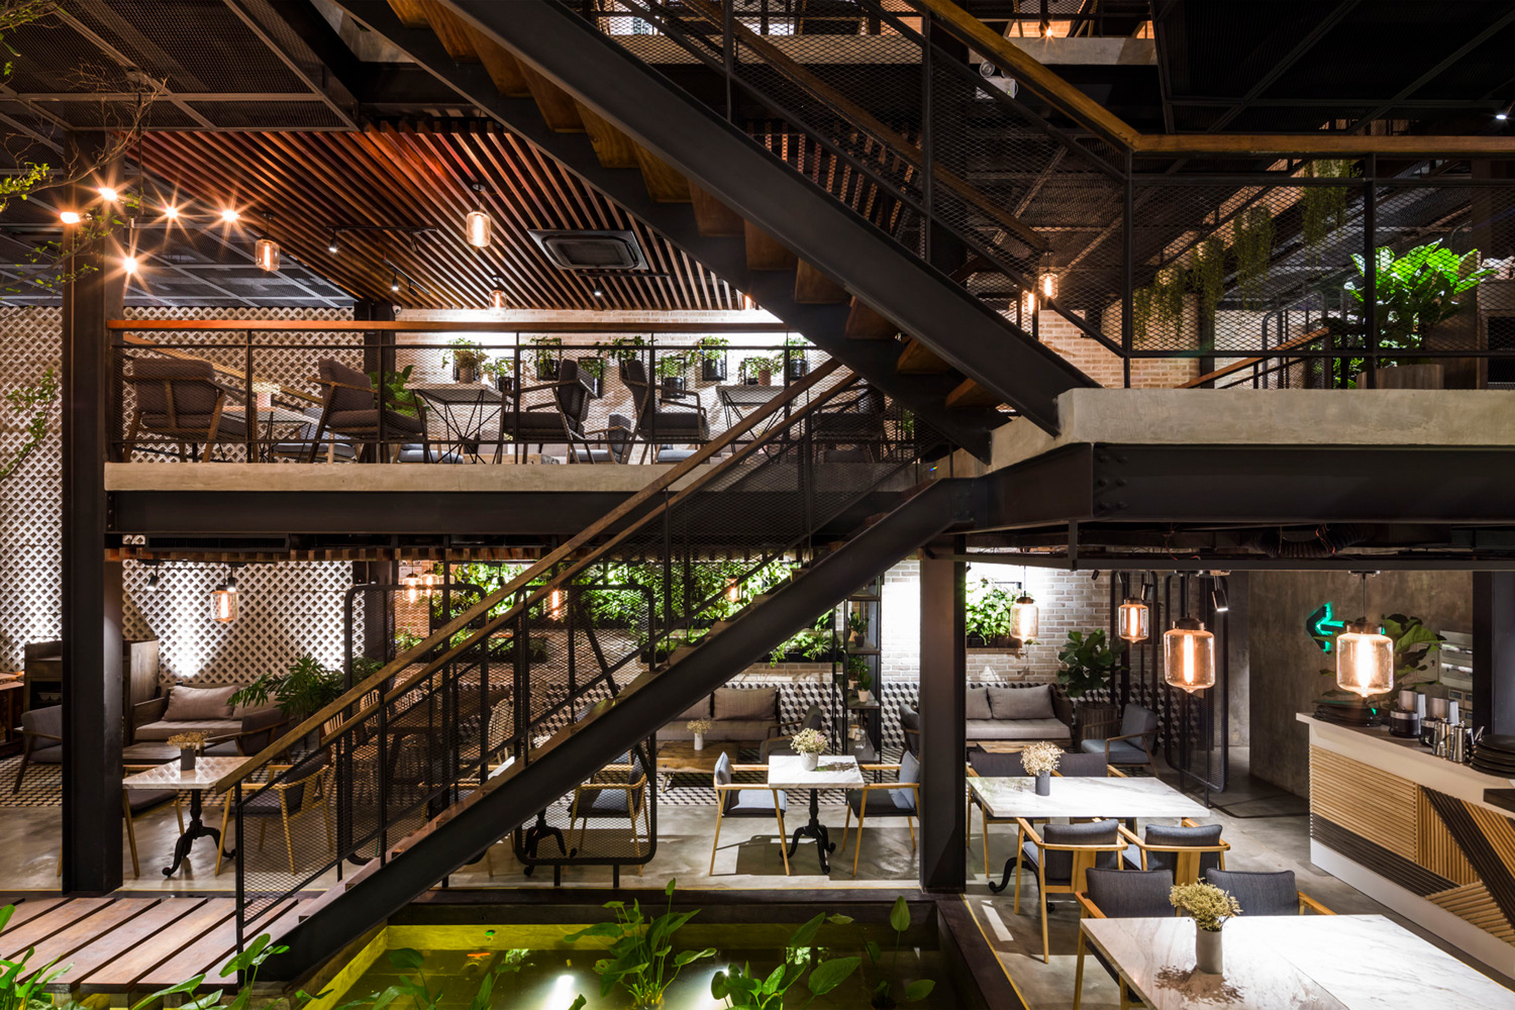 How Vietnam's architects are embracing biophilia